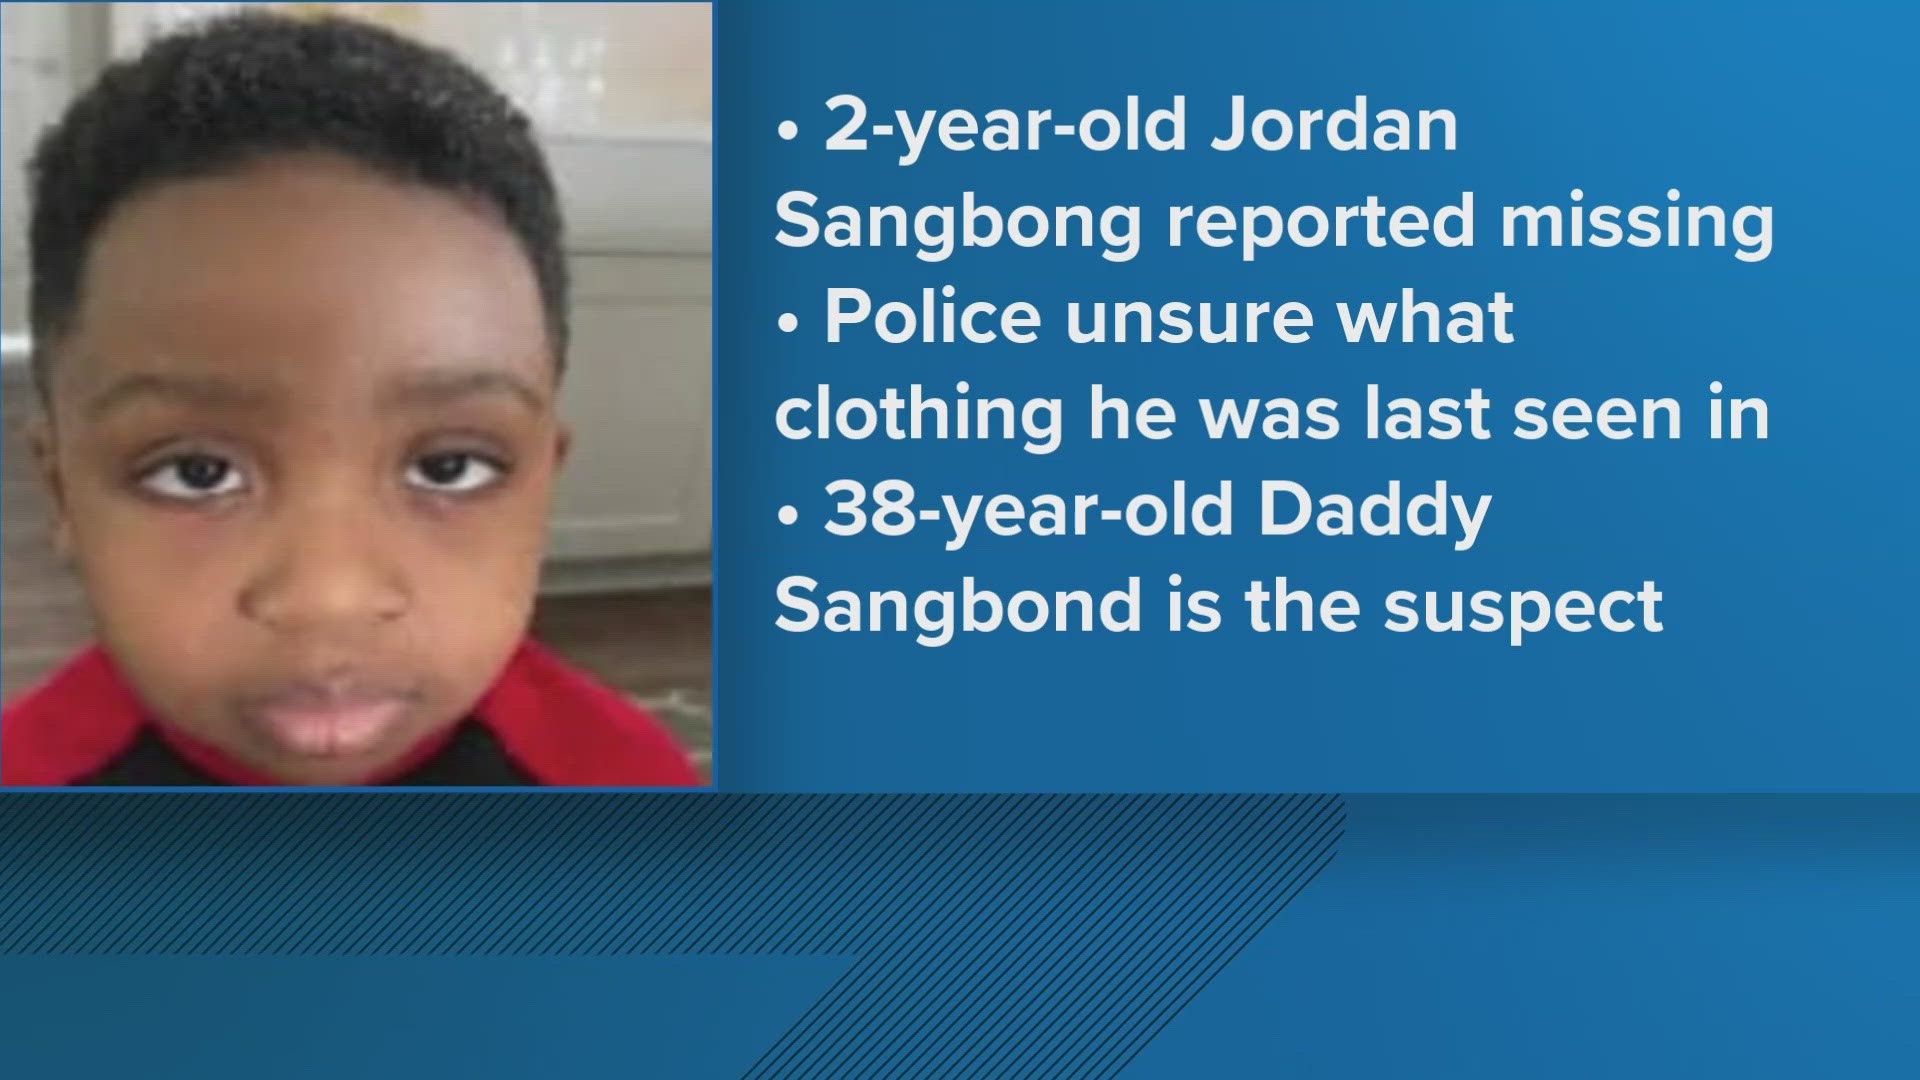 The alert said that Jordan Sangbong was last seen just after 10 p.m. on Wednesday.